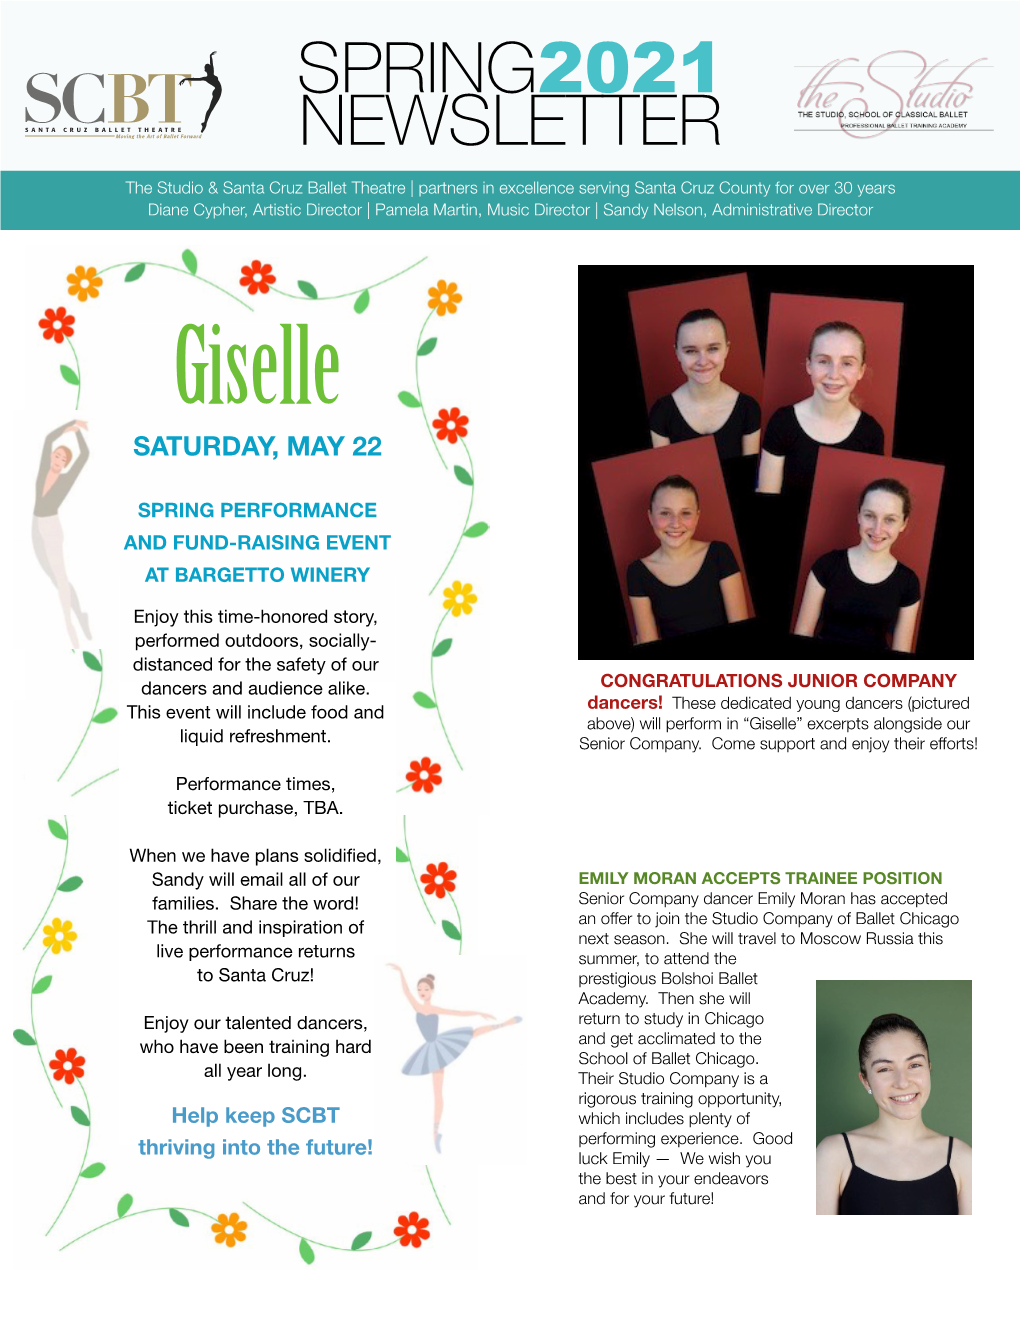 Giselle SATURDAY, MAY 22